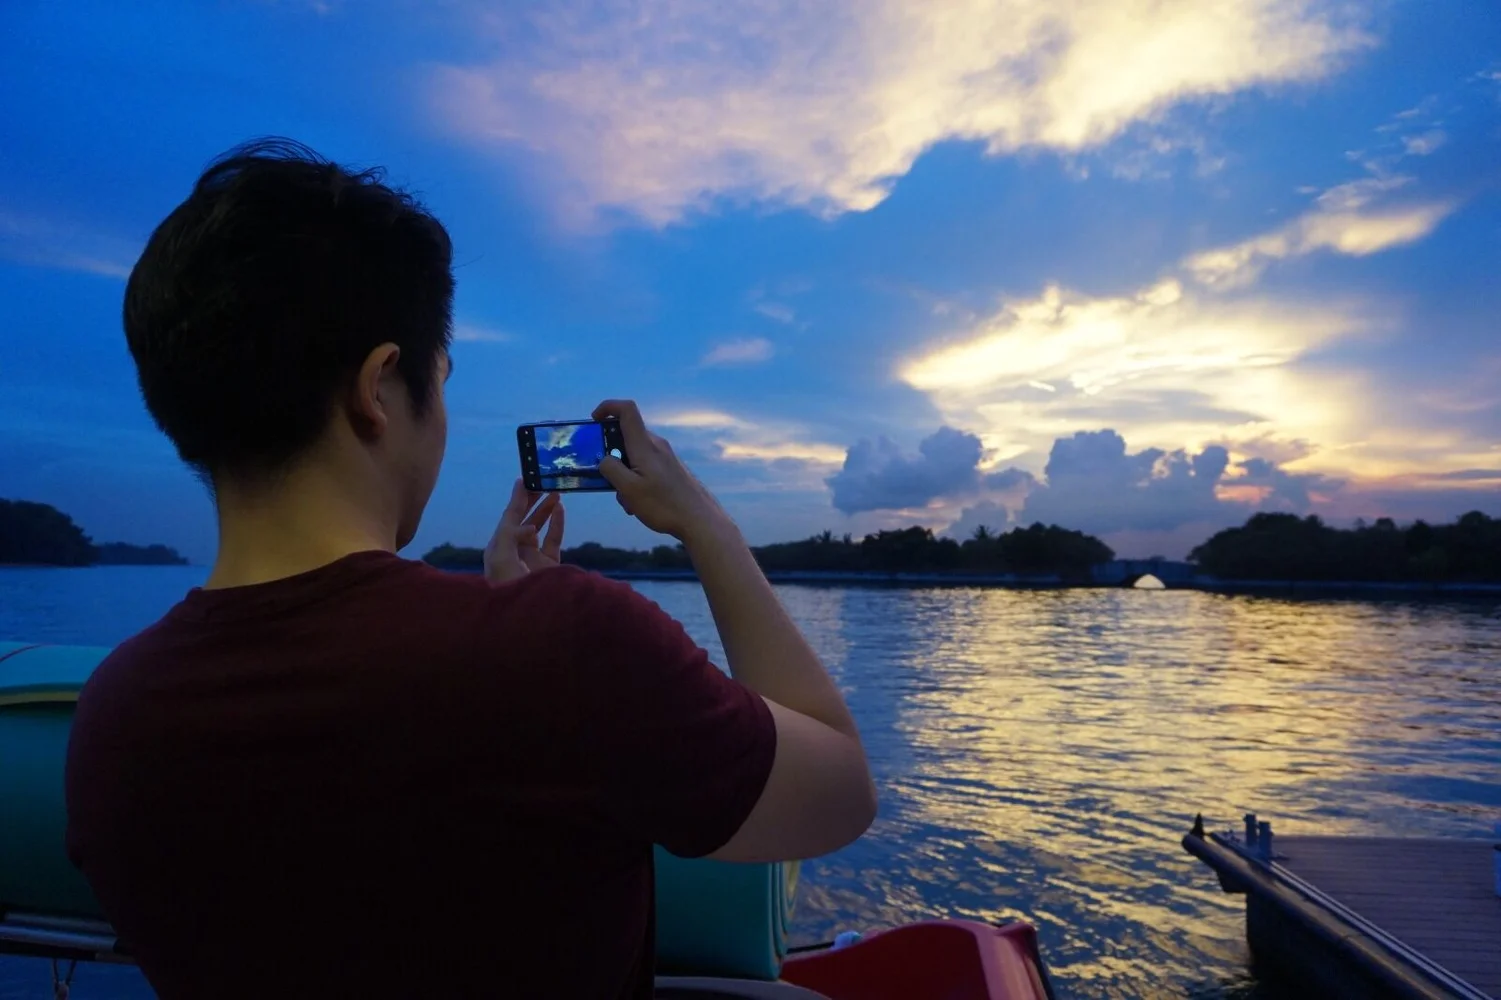 Take a Relaxing Sunset Cruise in Singapore